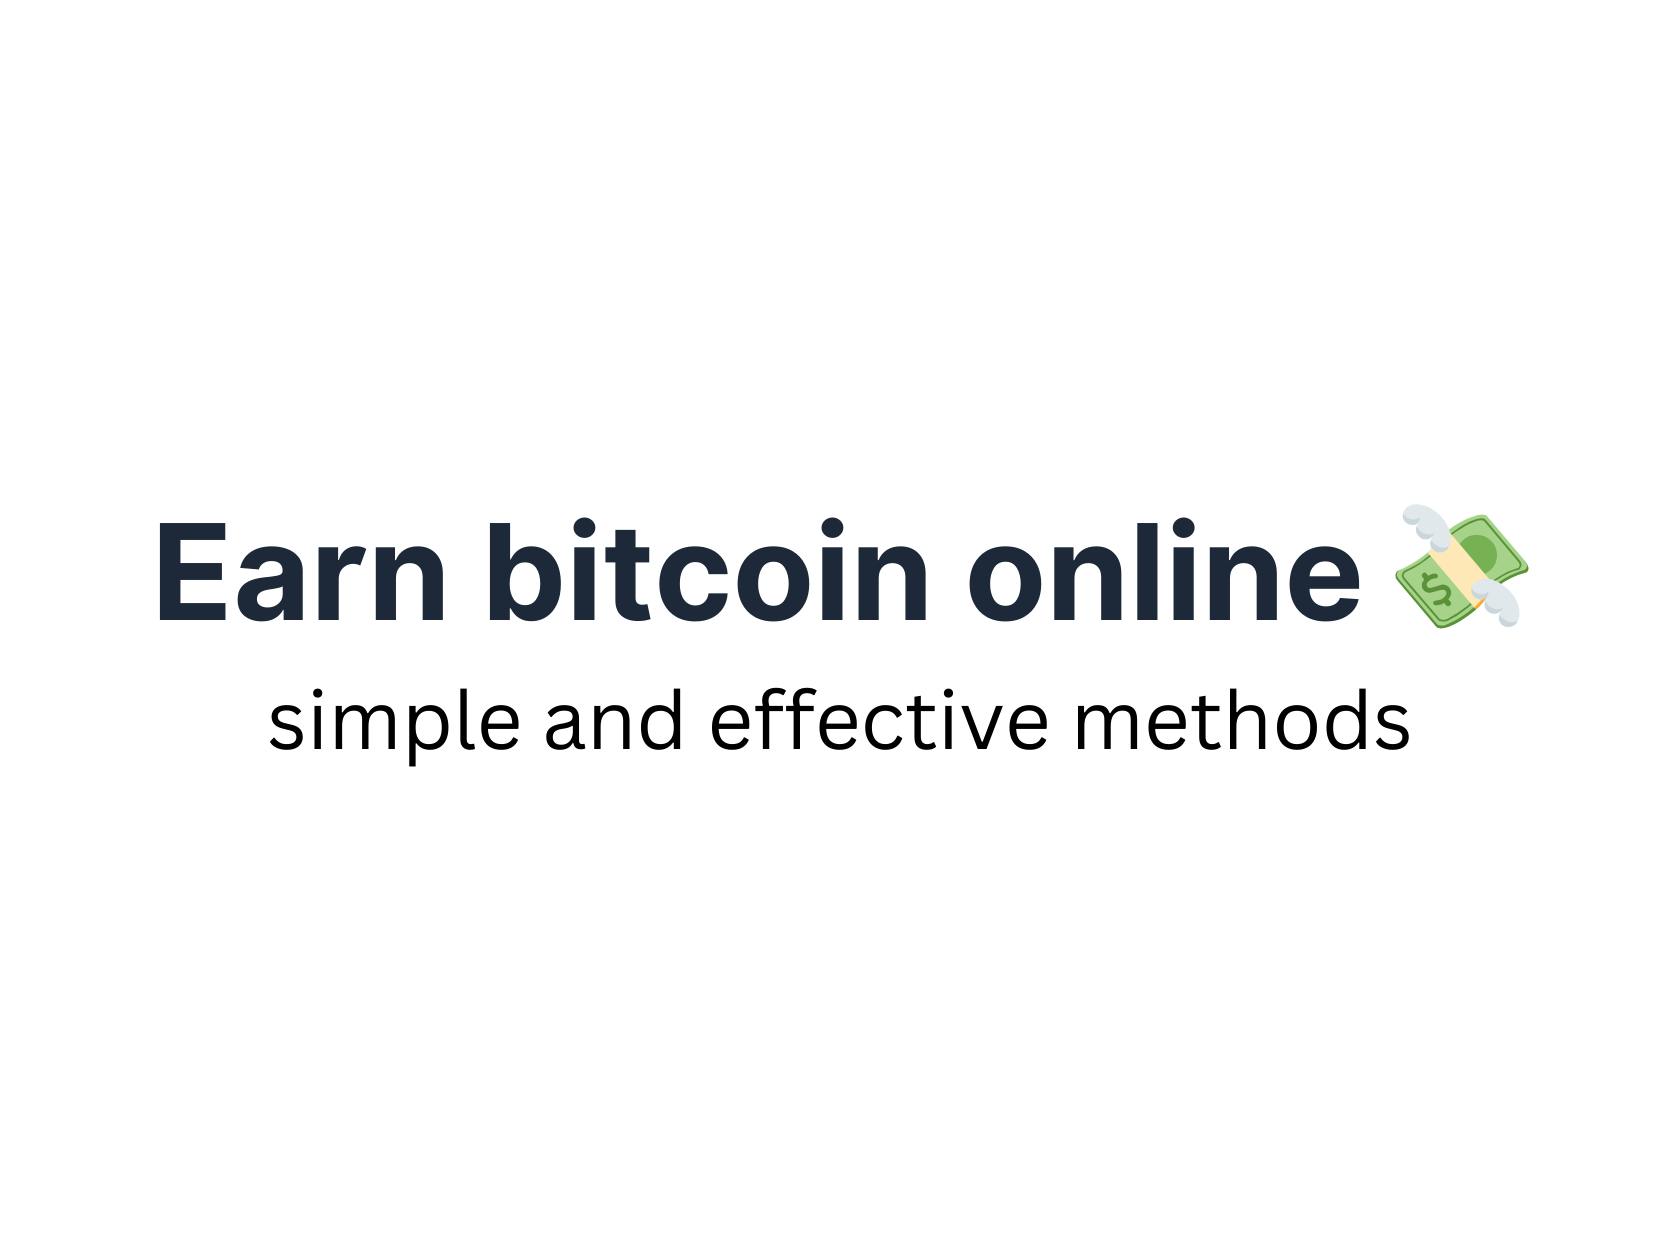 Earn Bitcoin Online: Simple and Effective Methods